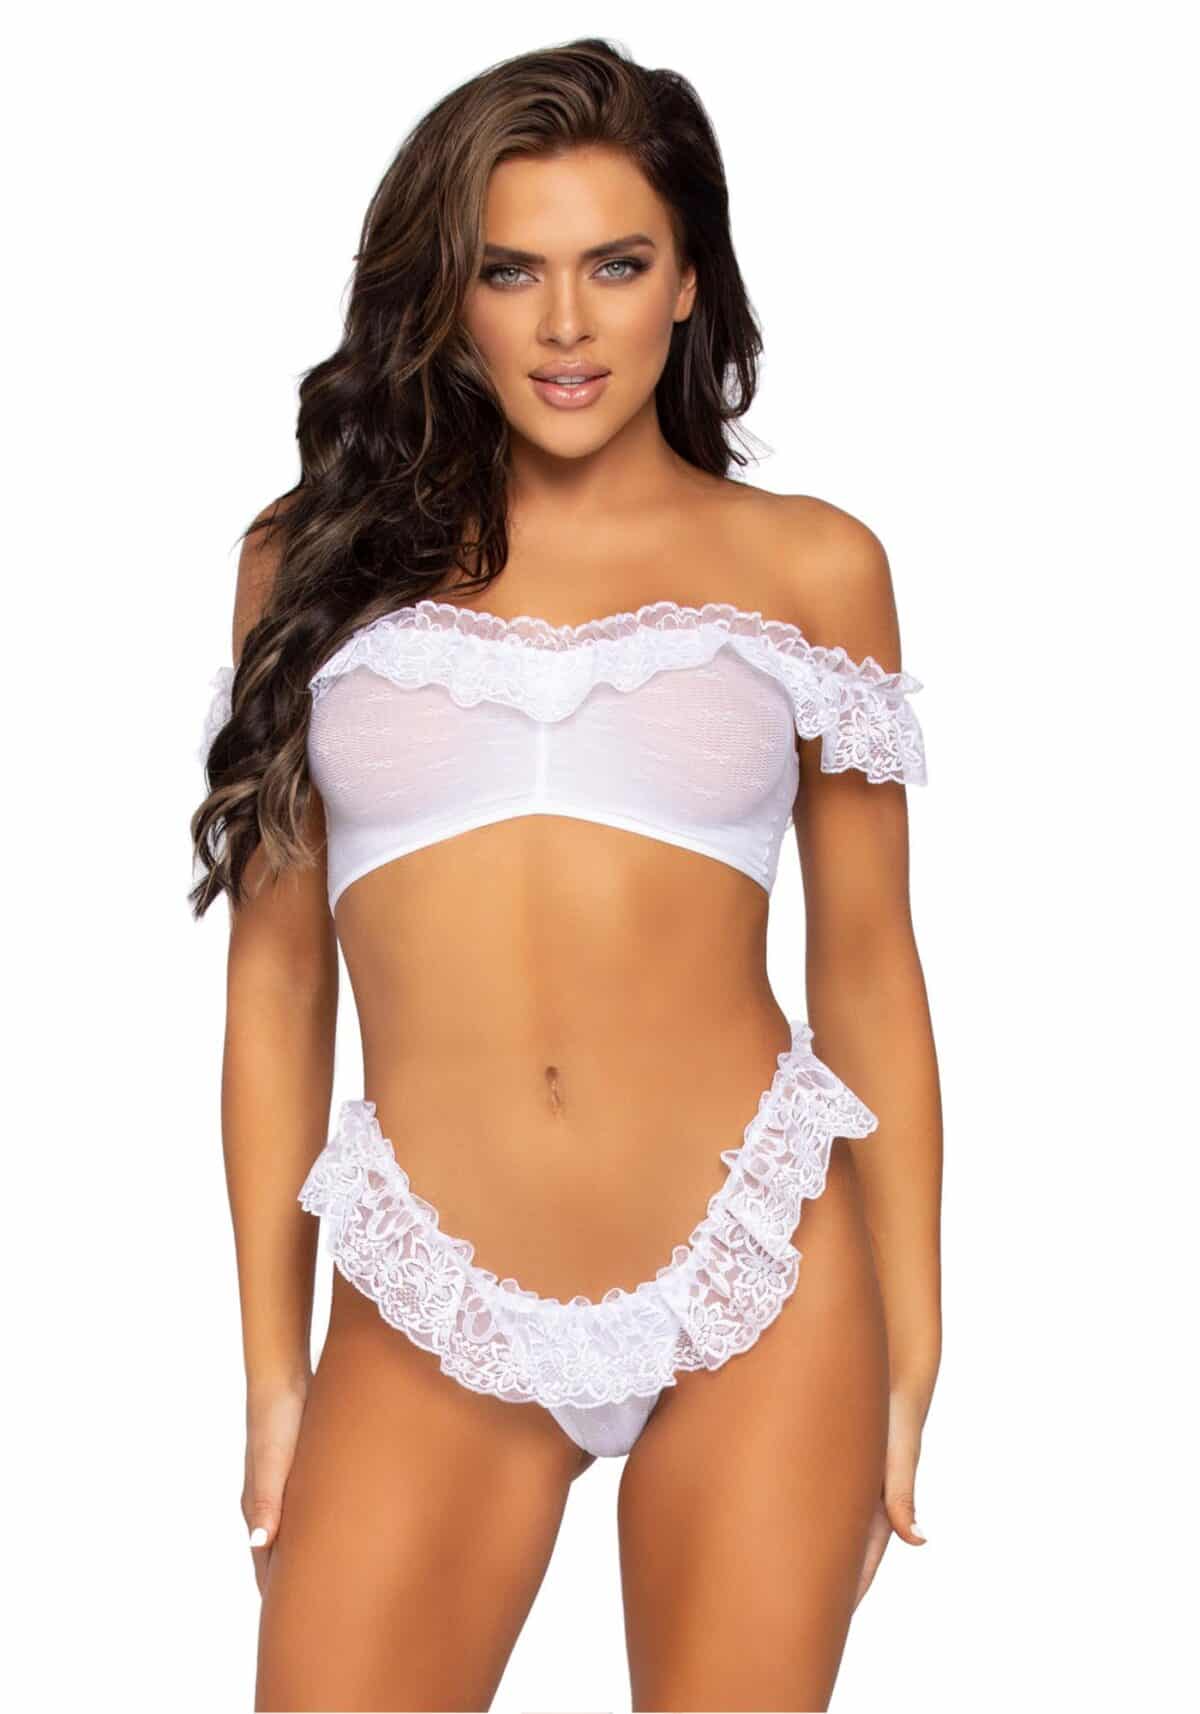 Lace ruffle crop top and panty